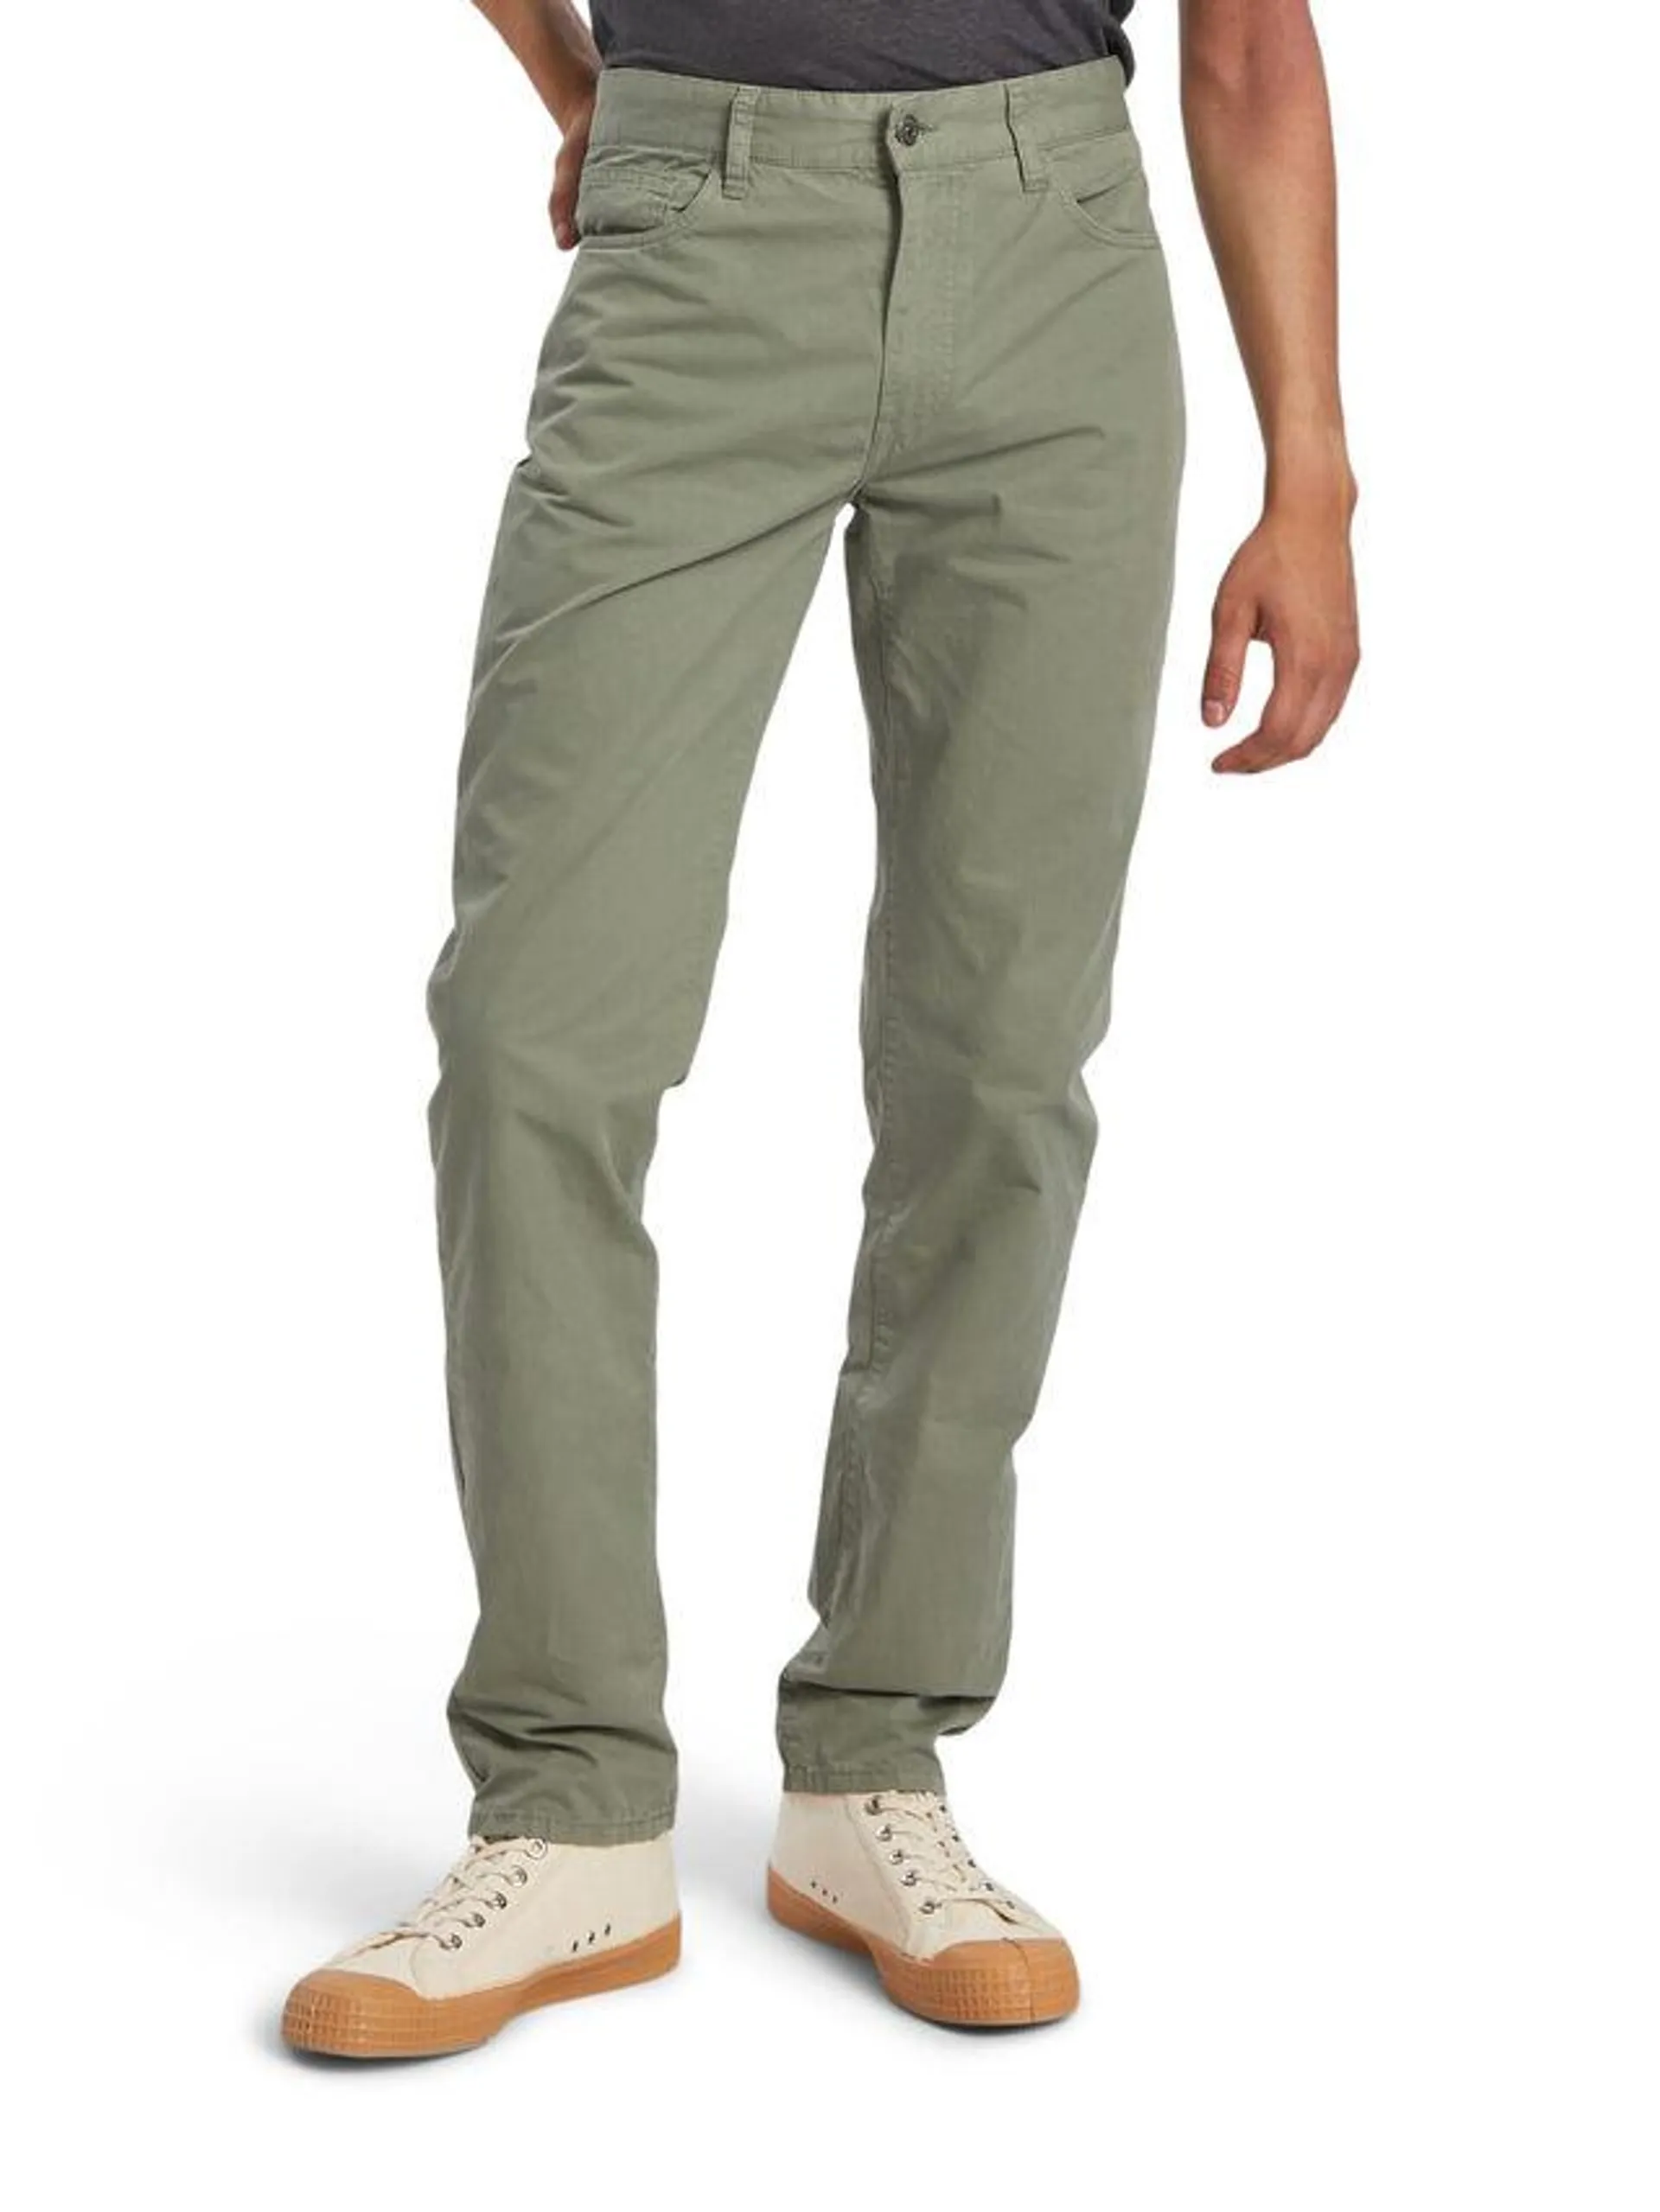 Tim 5 Pocket Two Ply Chino Trouser